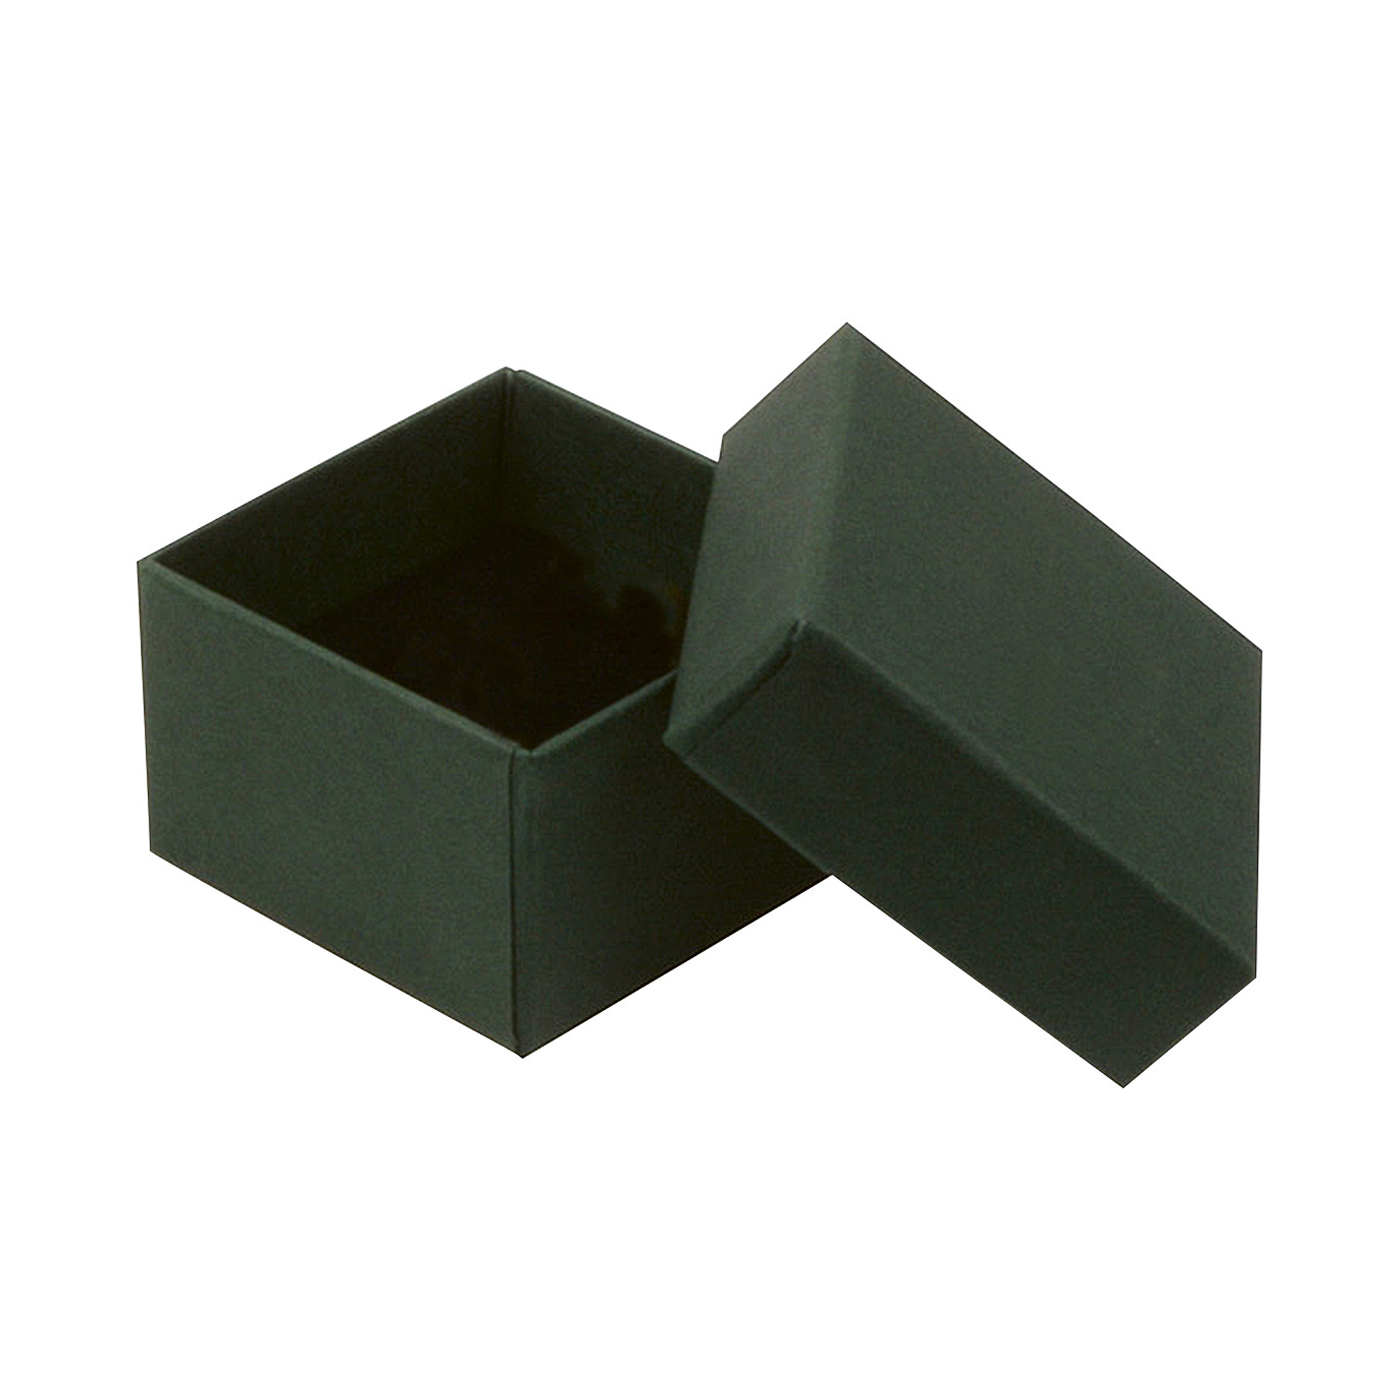 Jewellery Packaging "Eco", Green, 50 x 50 x 32 mm - 1 piece